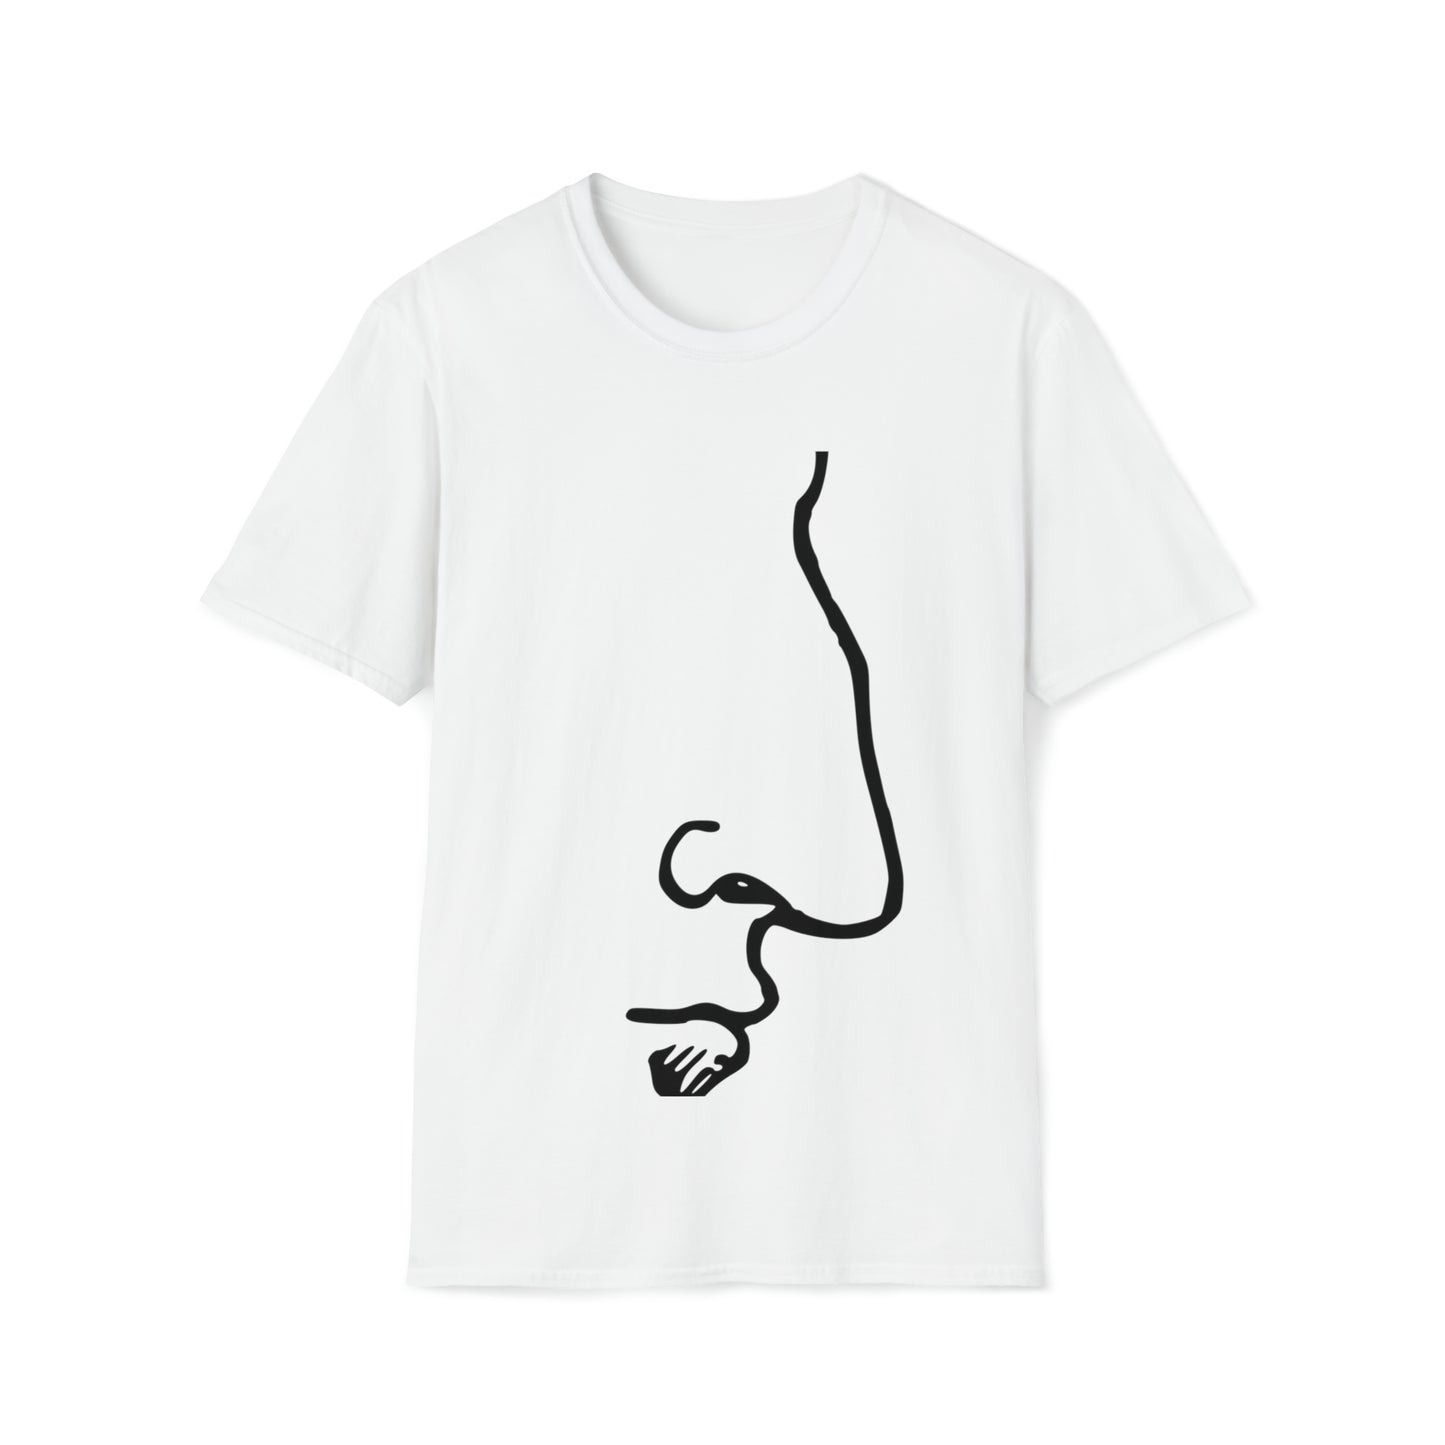 The Nose tshirt